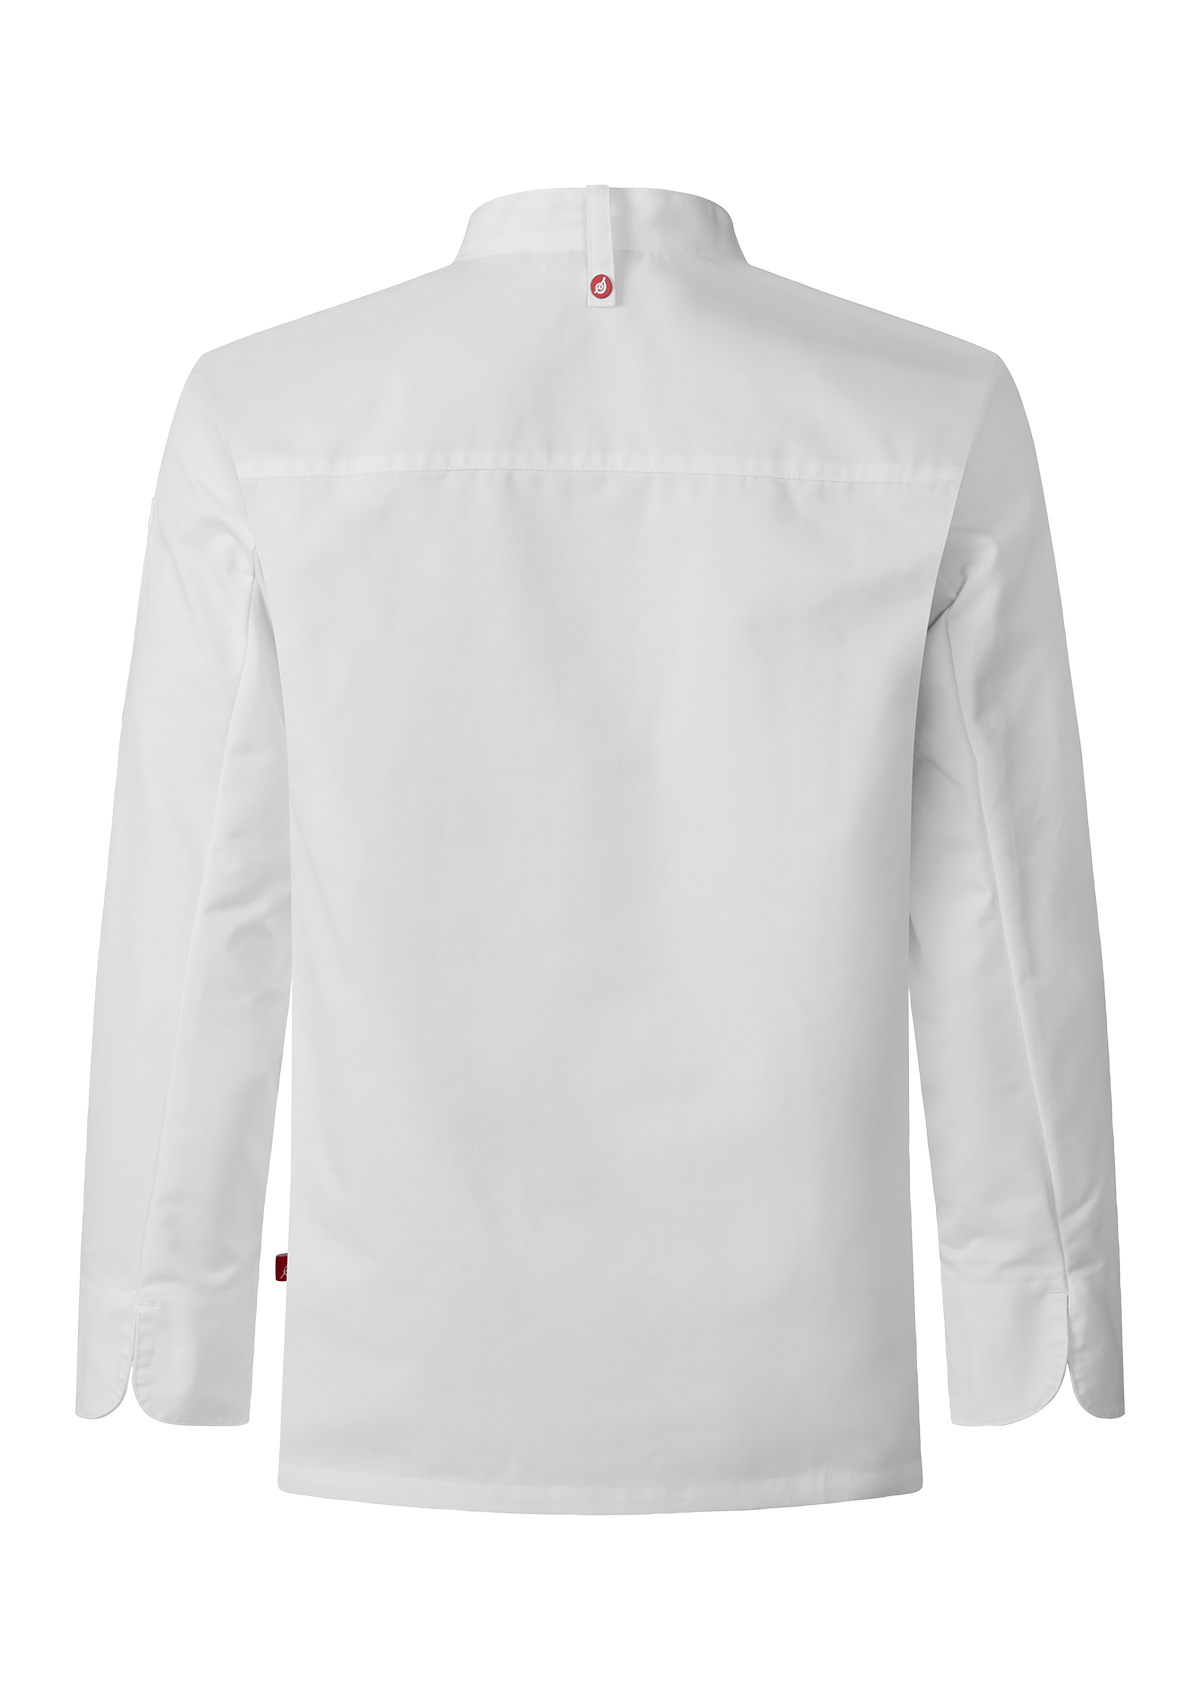 Smart Unisex Chef's Shirt with Long Sleeves